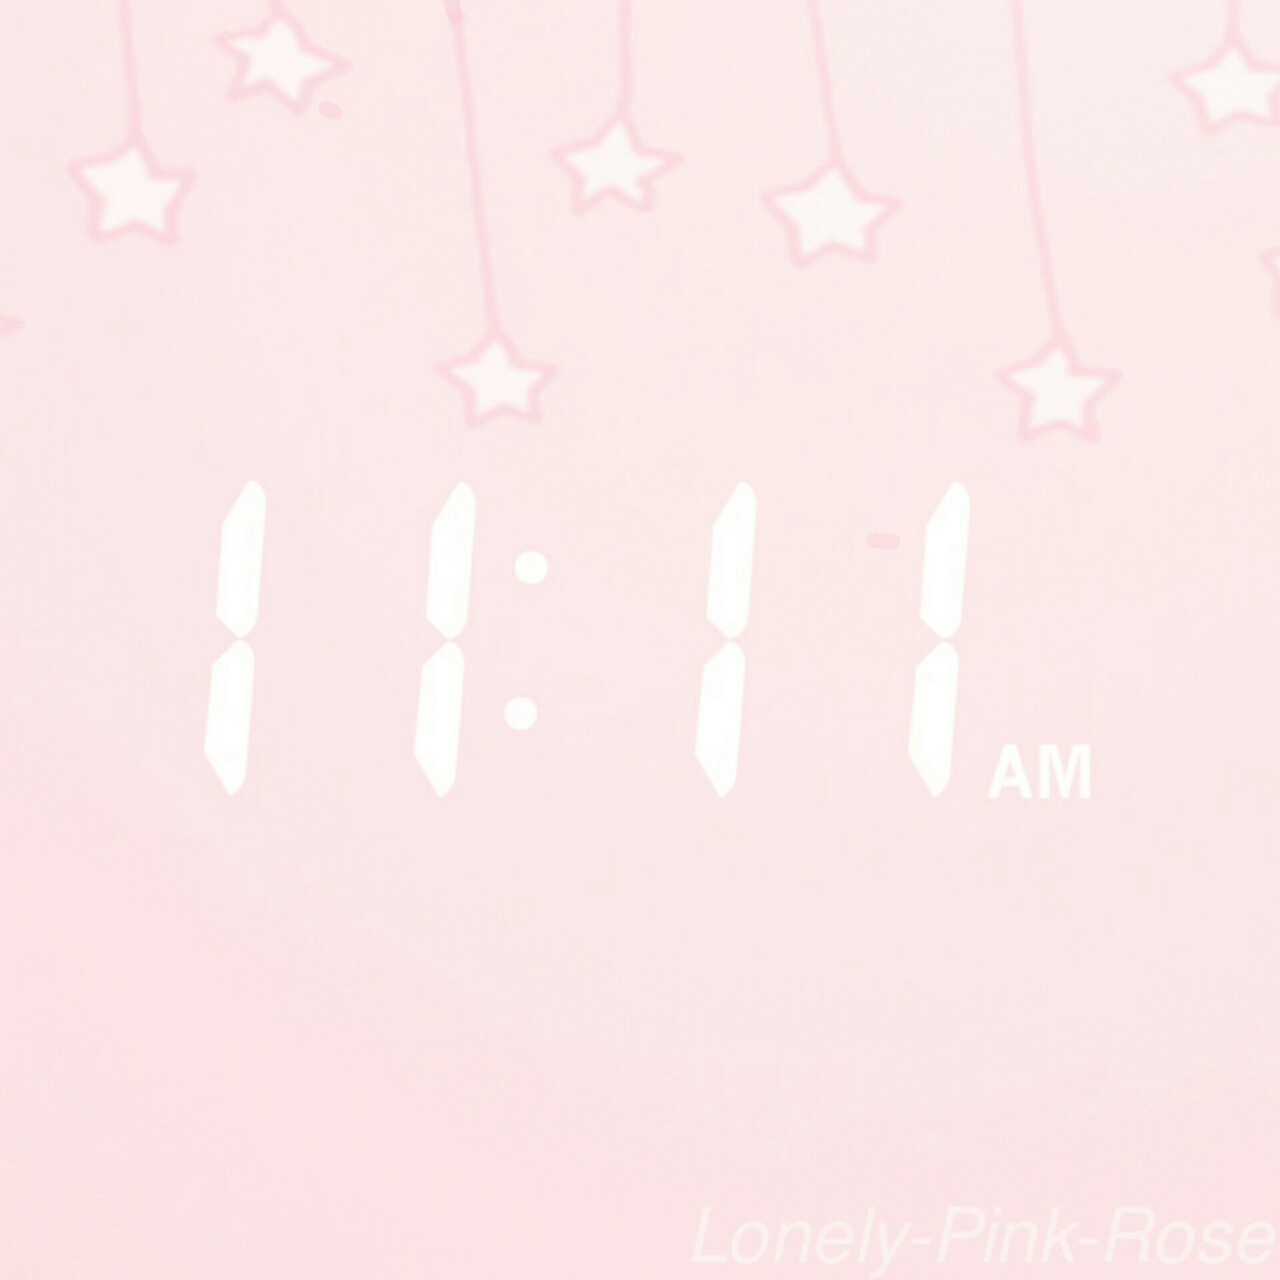 lonely-pink-rose:  lonely-pink-rose : my photo ; my edit. (Don’t remove my caption.)